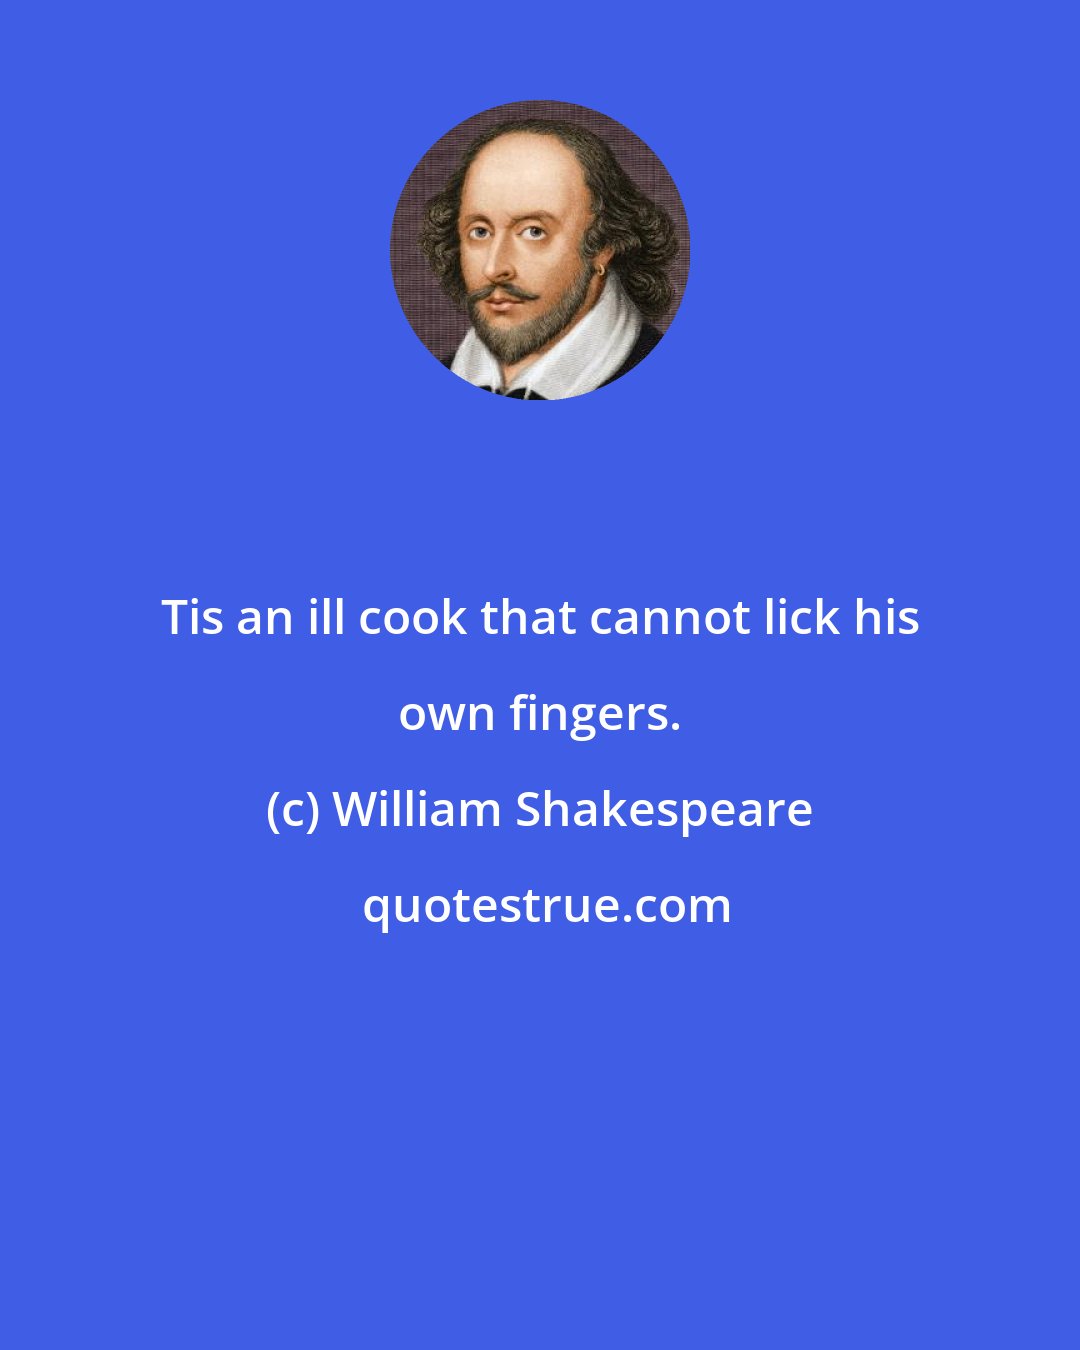 William Shakespeare: Tis an ill cook that cannot lick his own fingers.